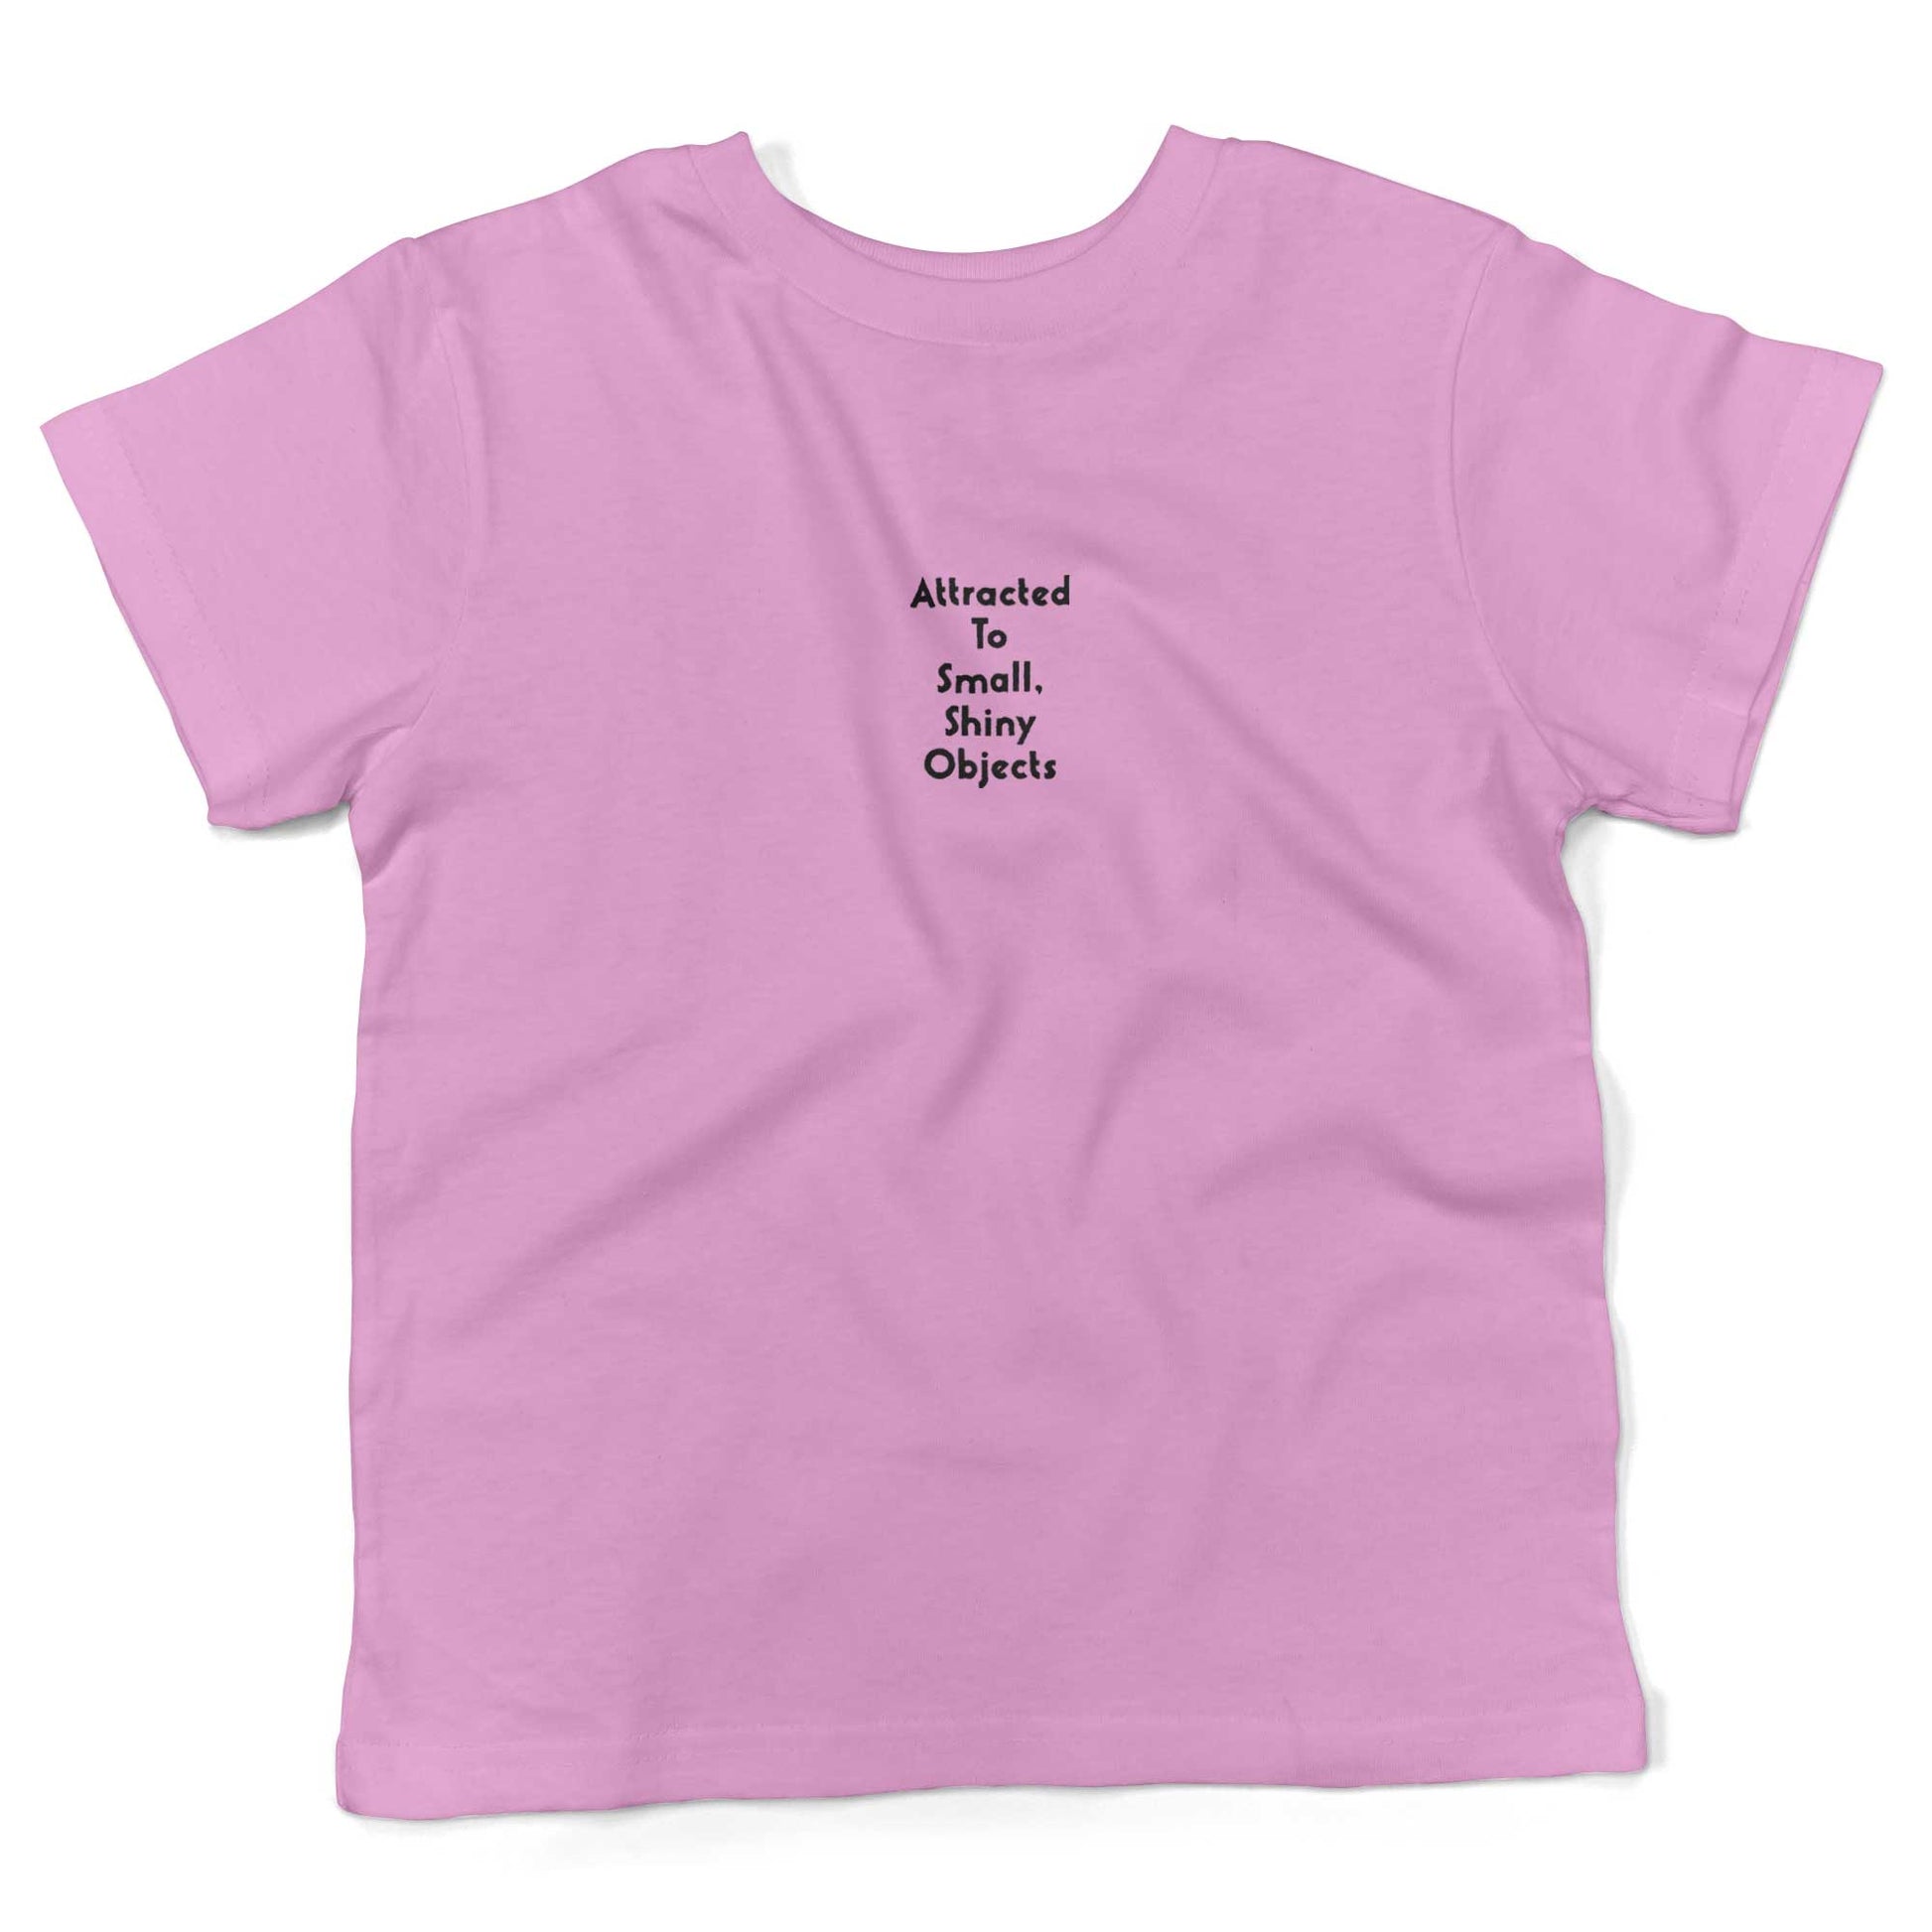 Attracted To Small, Shiny Objects Toddler Shirt-Organic Pink-2T